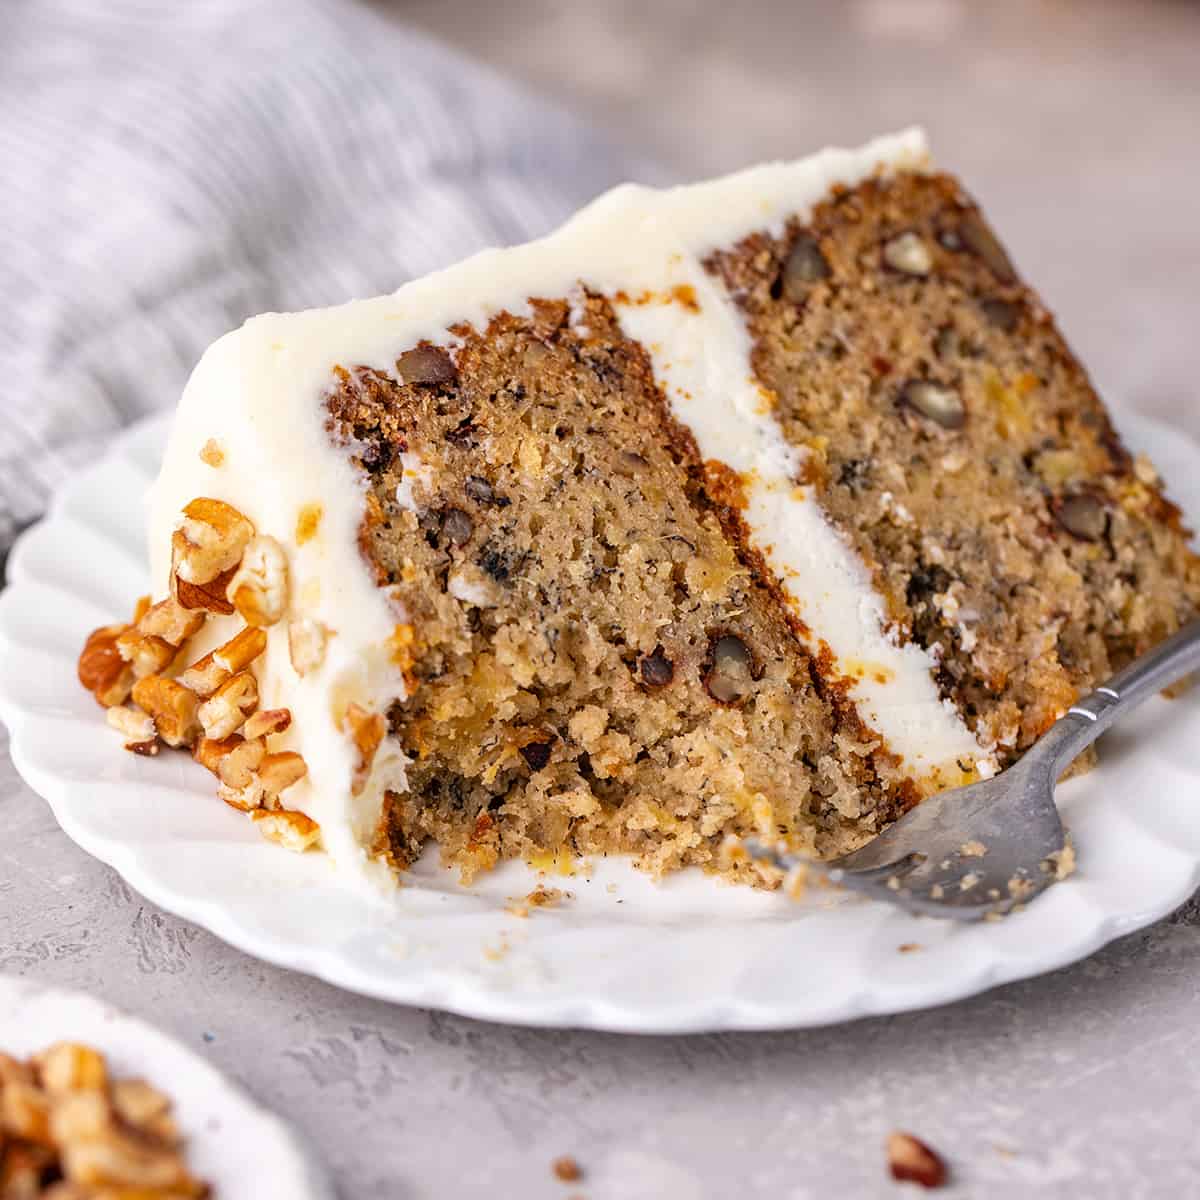 hummingbird cake on a plate with a bite taken out of it